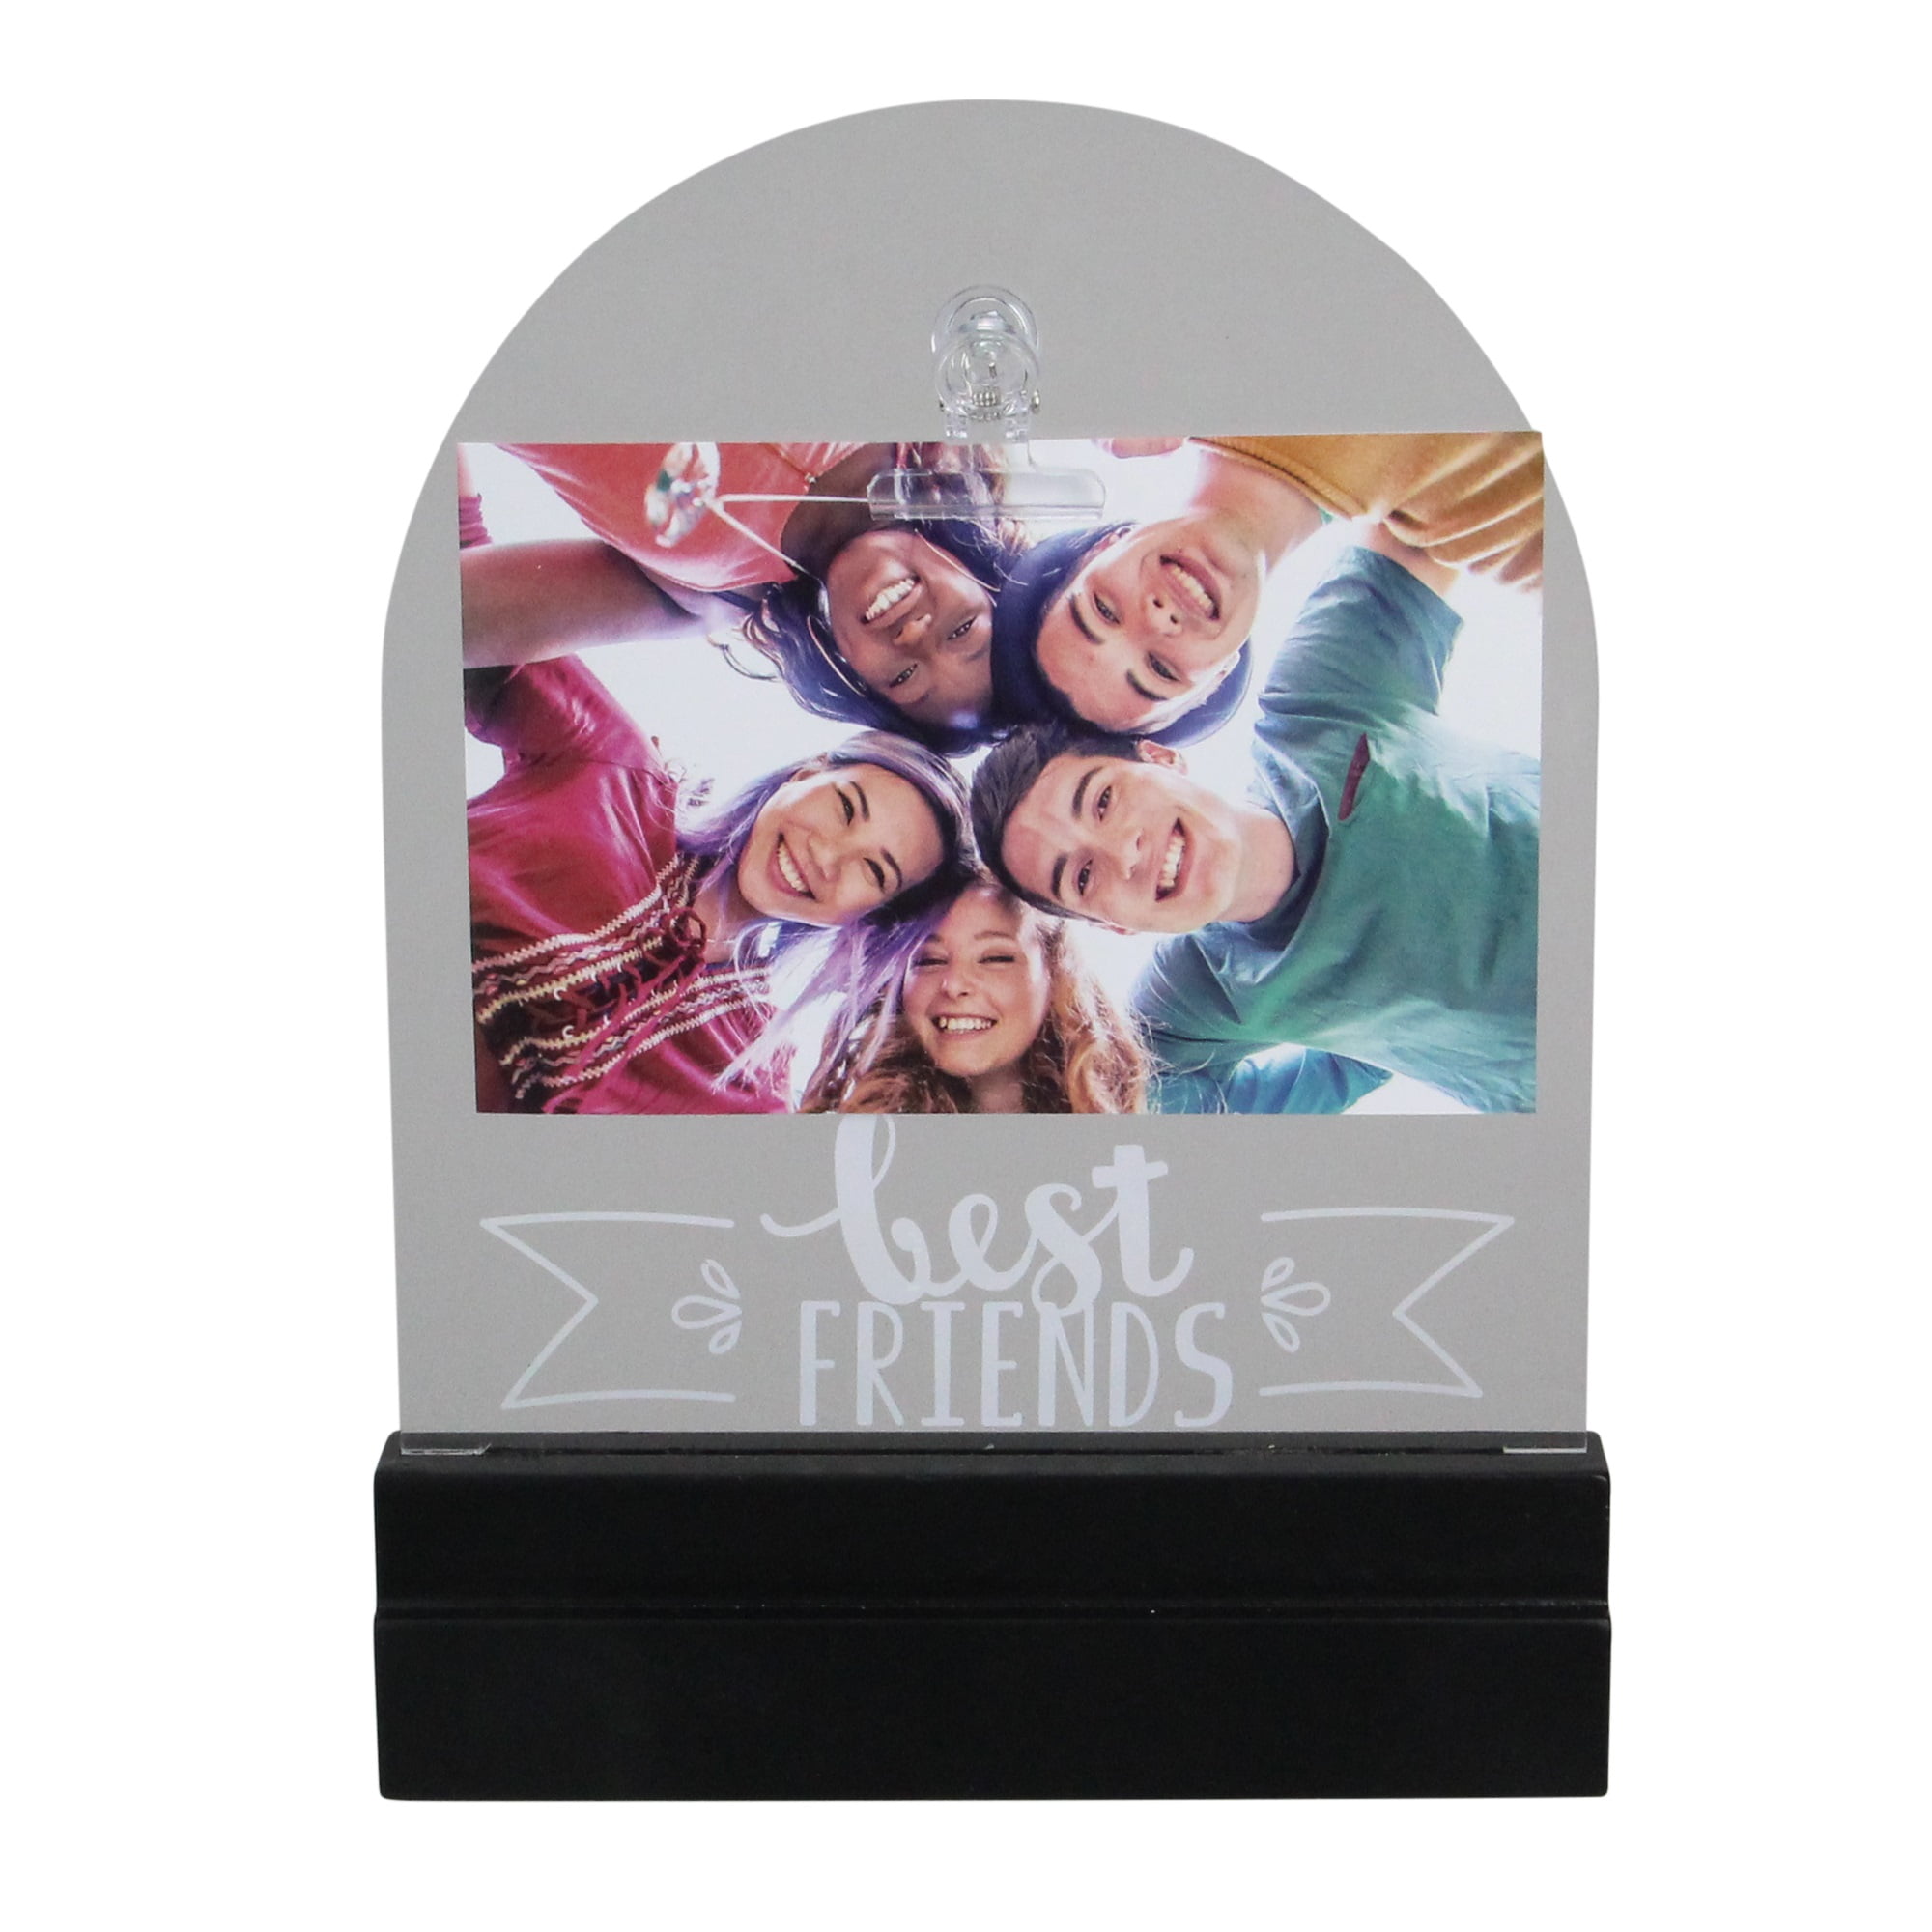 LED Picture Frame Illuminated Friends Gifts Decorative FRIENDSHIP FRIEND Star 